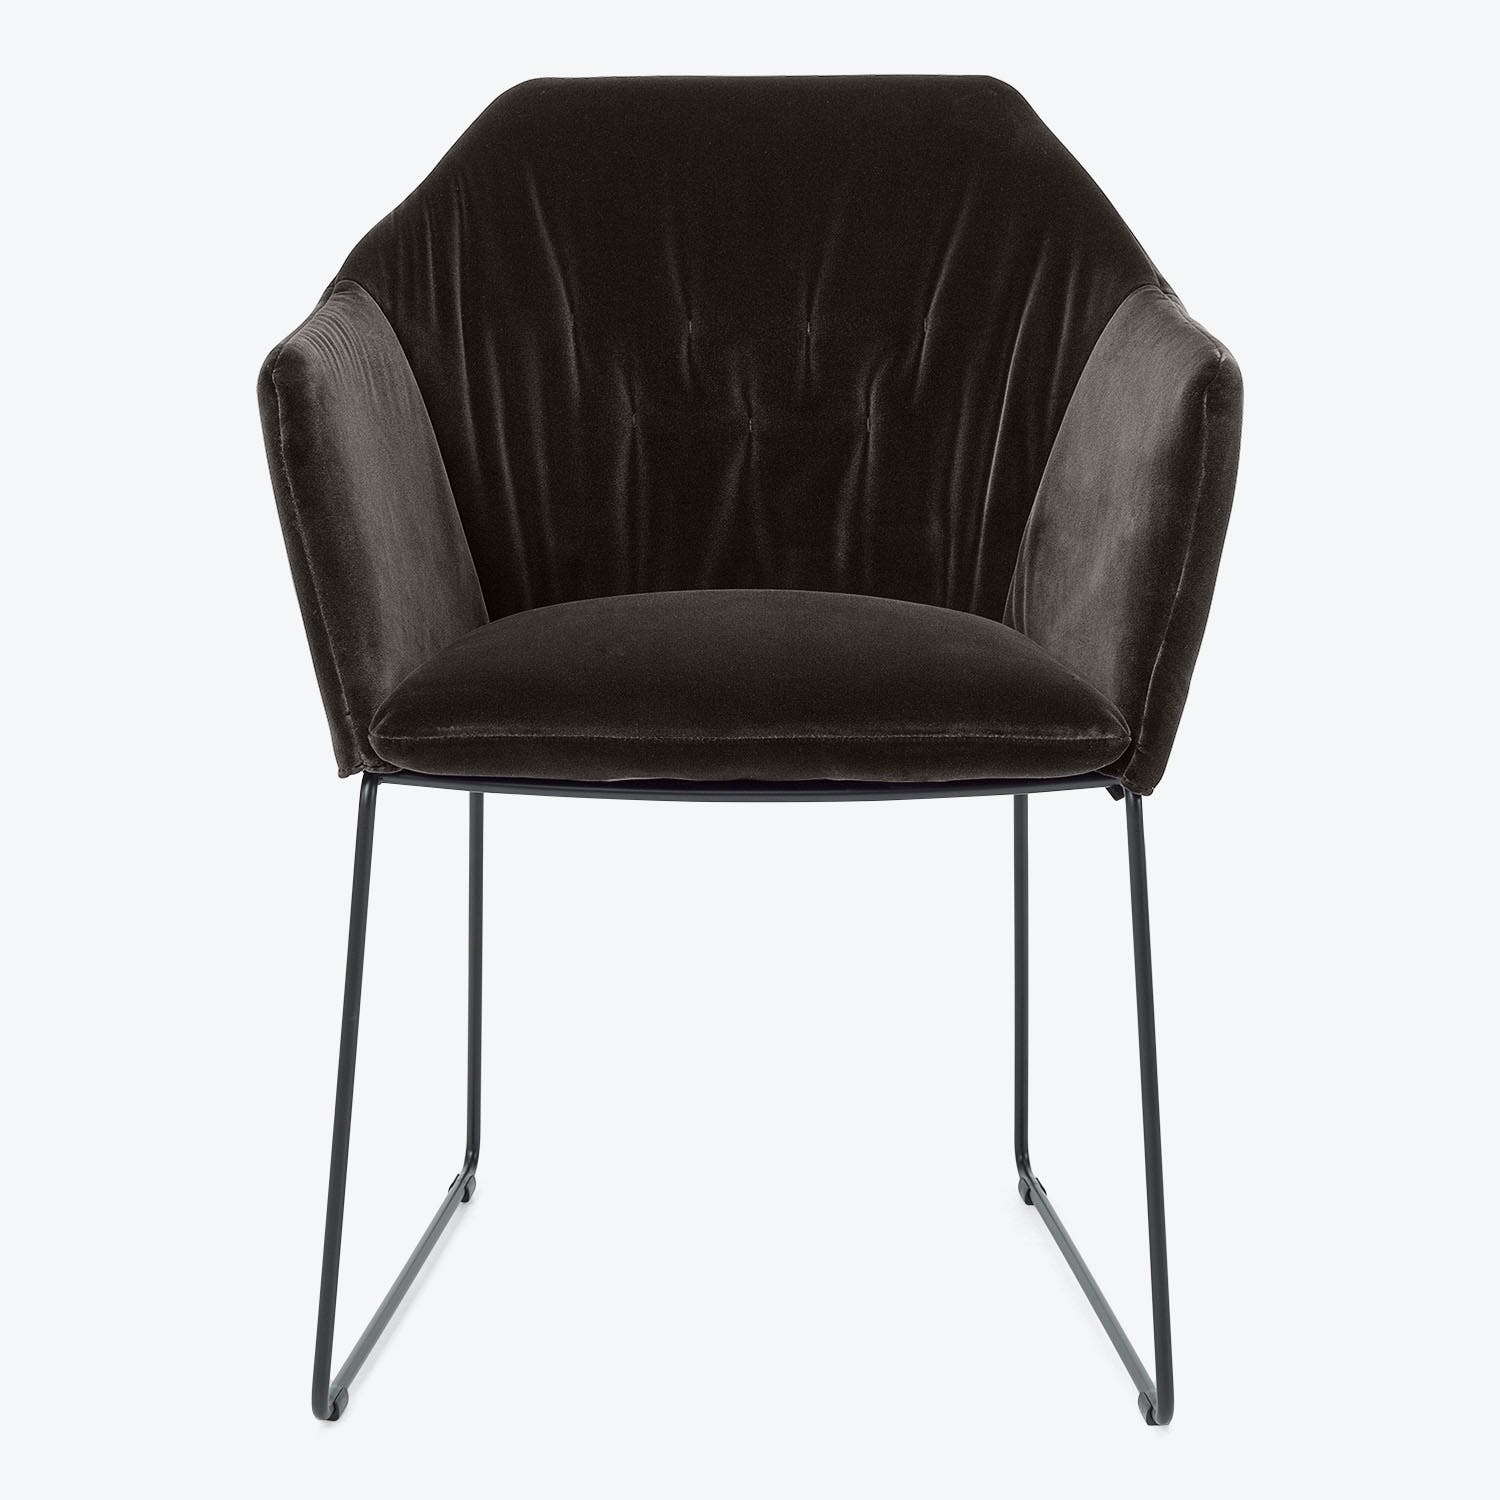 Contemporary black velvet armchair with tufted design and minimalist frame